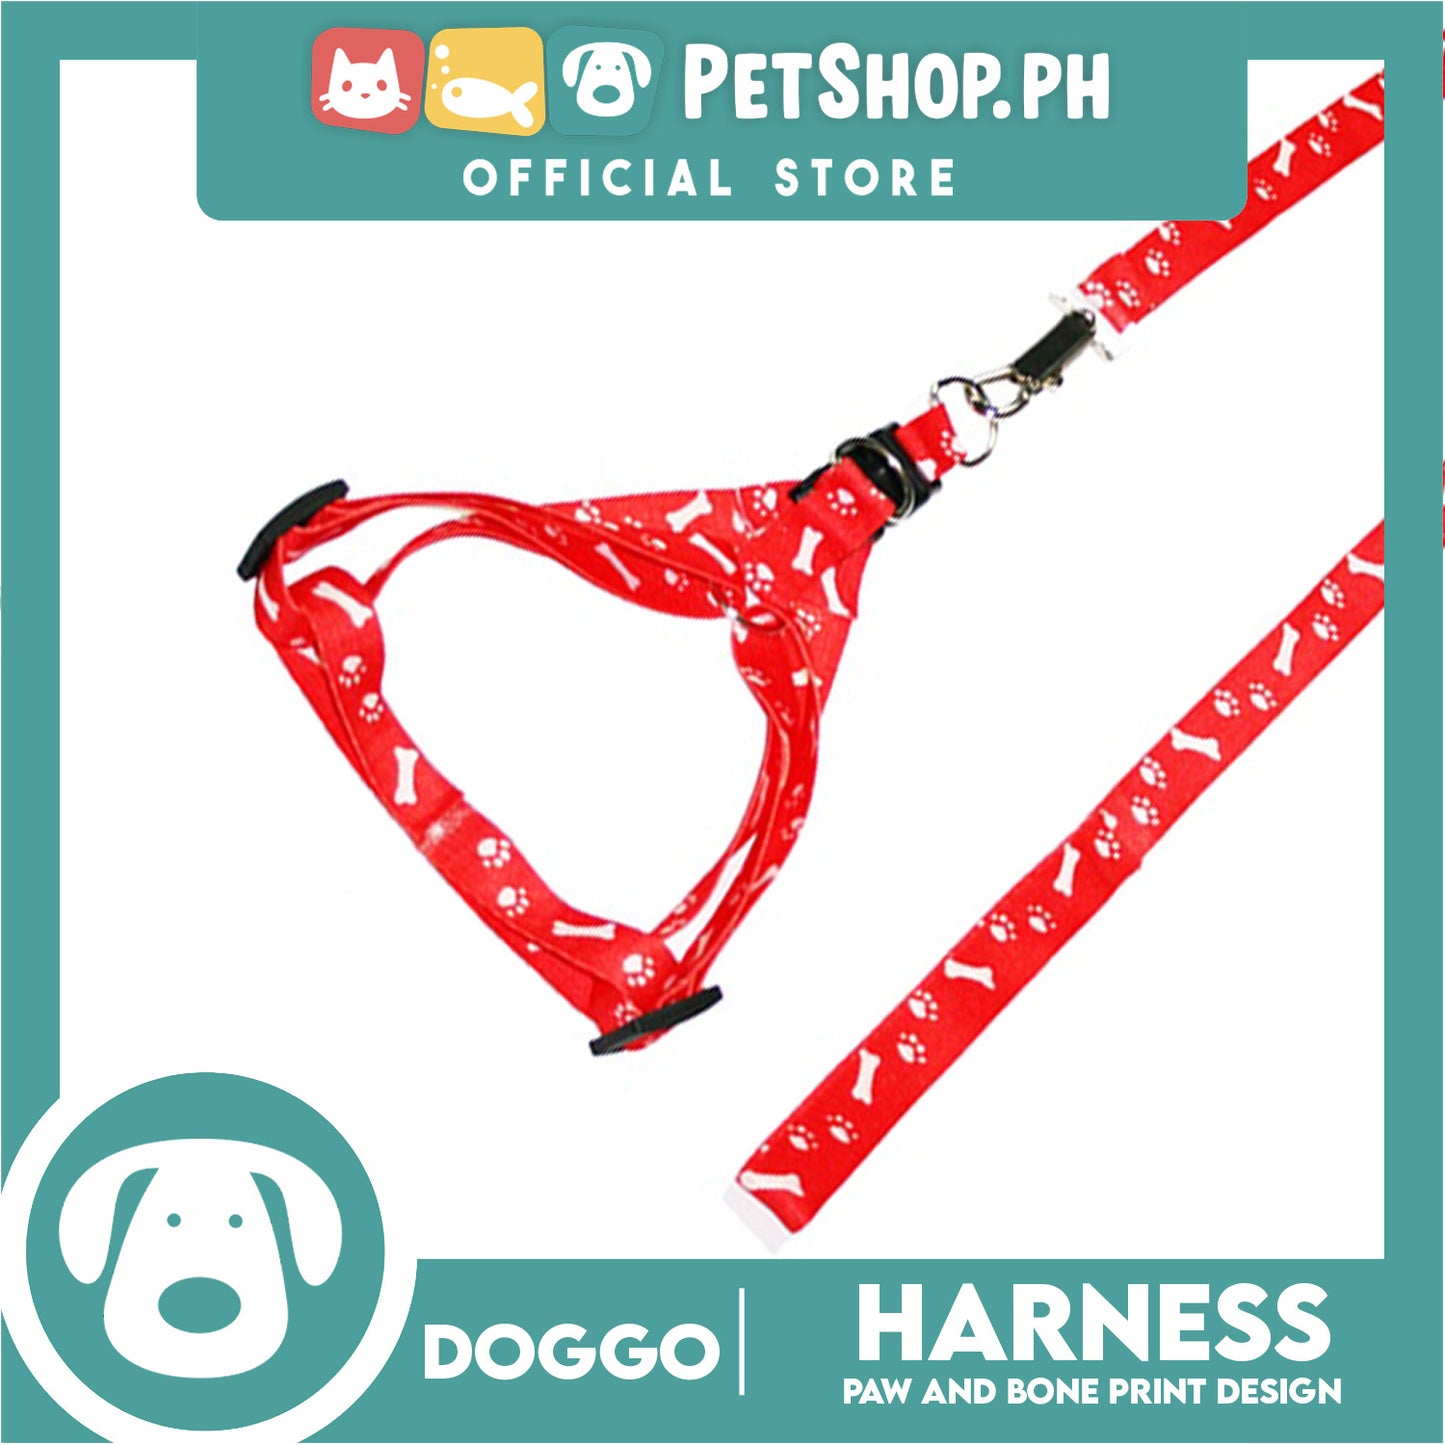 Doggo Harness Leash With Design Medium Size (Red) Harness Leash for Your Puppy